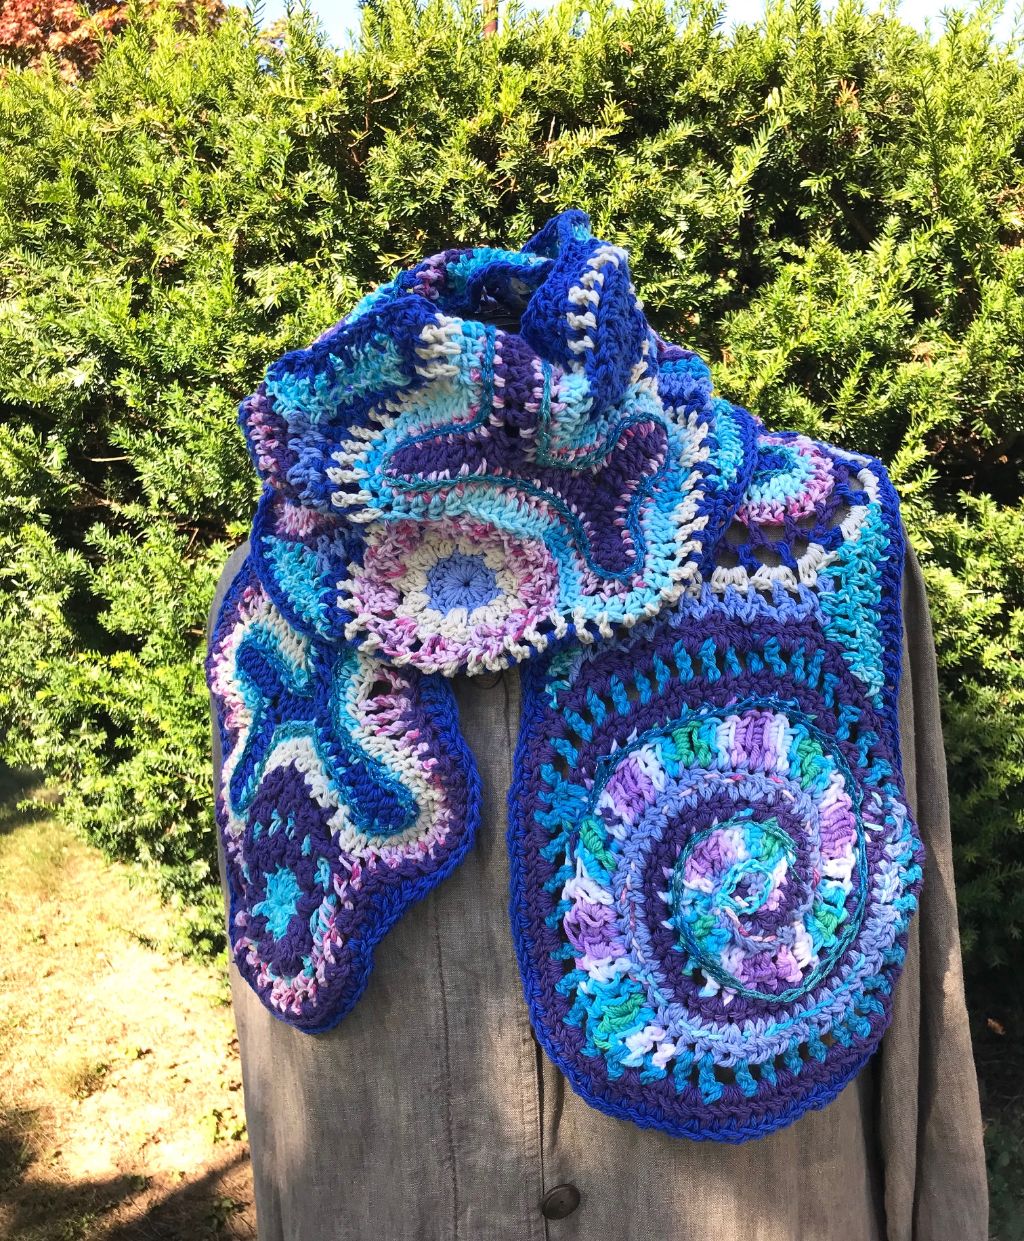 Free Form Crochet Scarf in Blues Purple and Pink